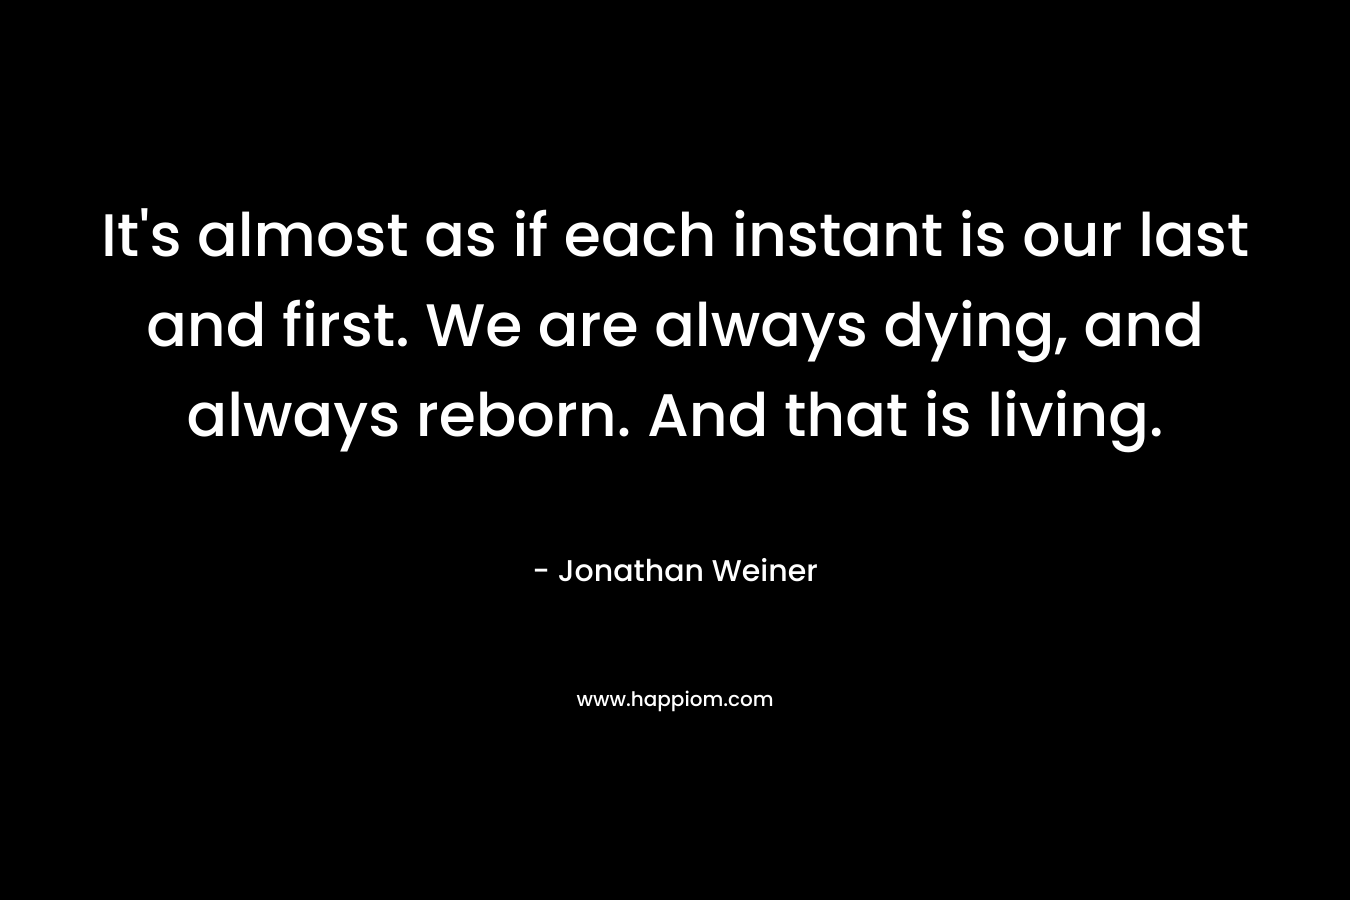 It's almost as if each instant is our last and first. We are always dying, and always reborn. And that is living.